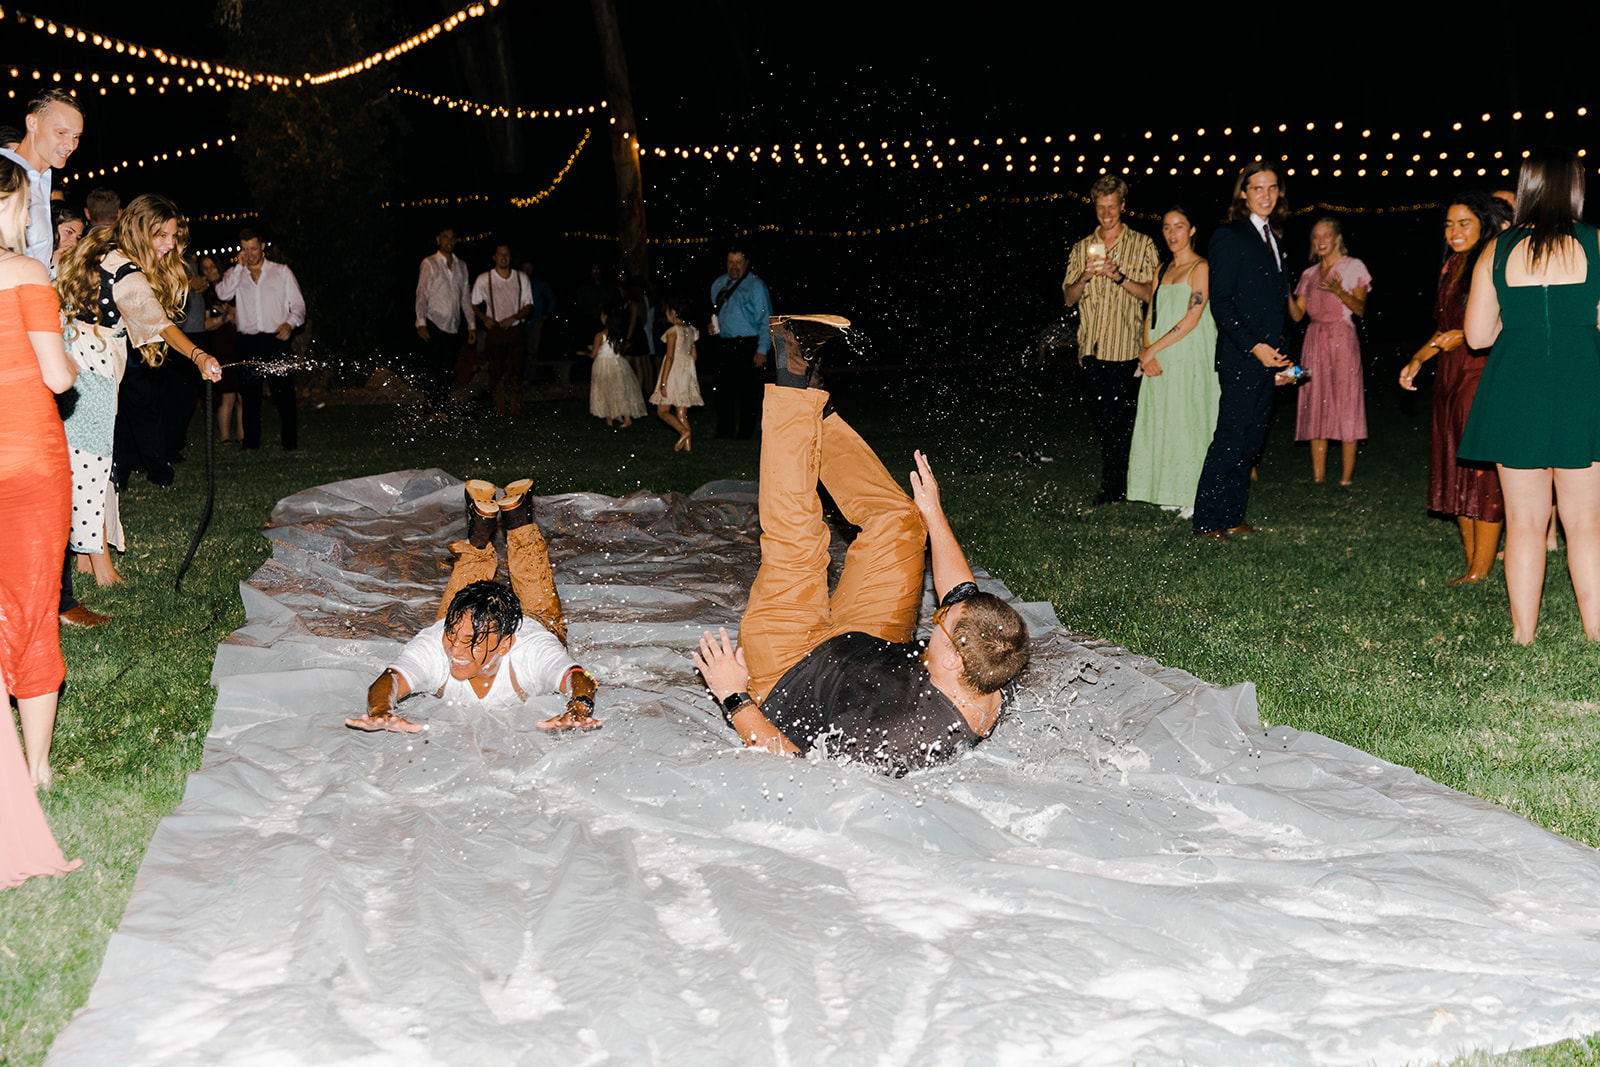 boho- chic couple does a slip 'n slide wedding exit followed by the bridal party and guests